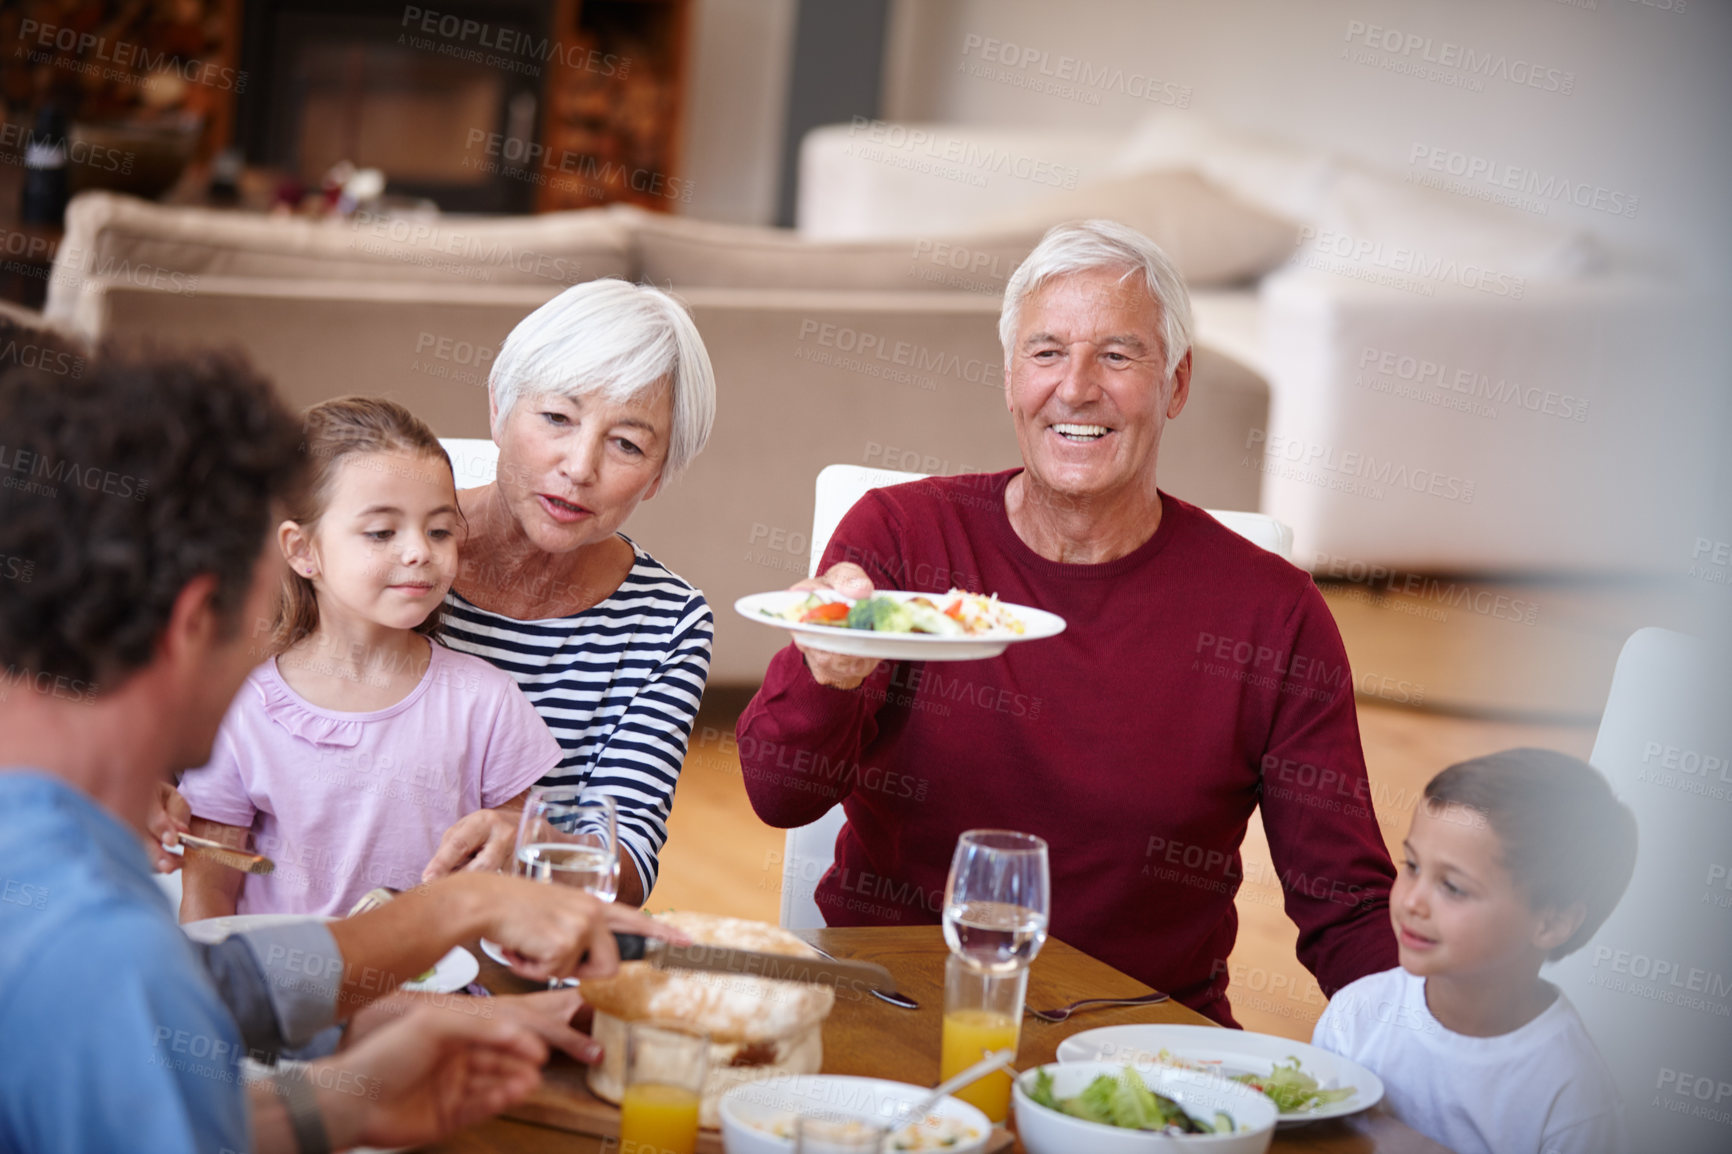 Buy stock photo Shot of a multi generational family having a meal together around a dining table